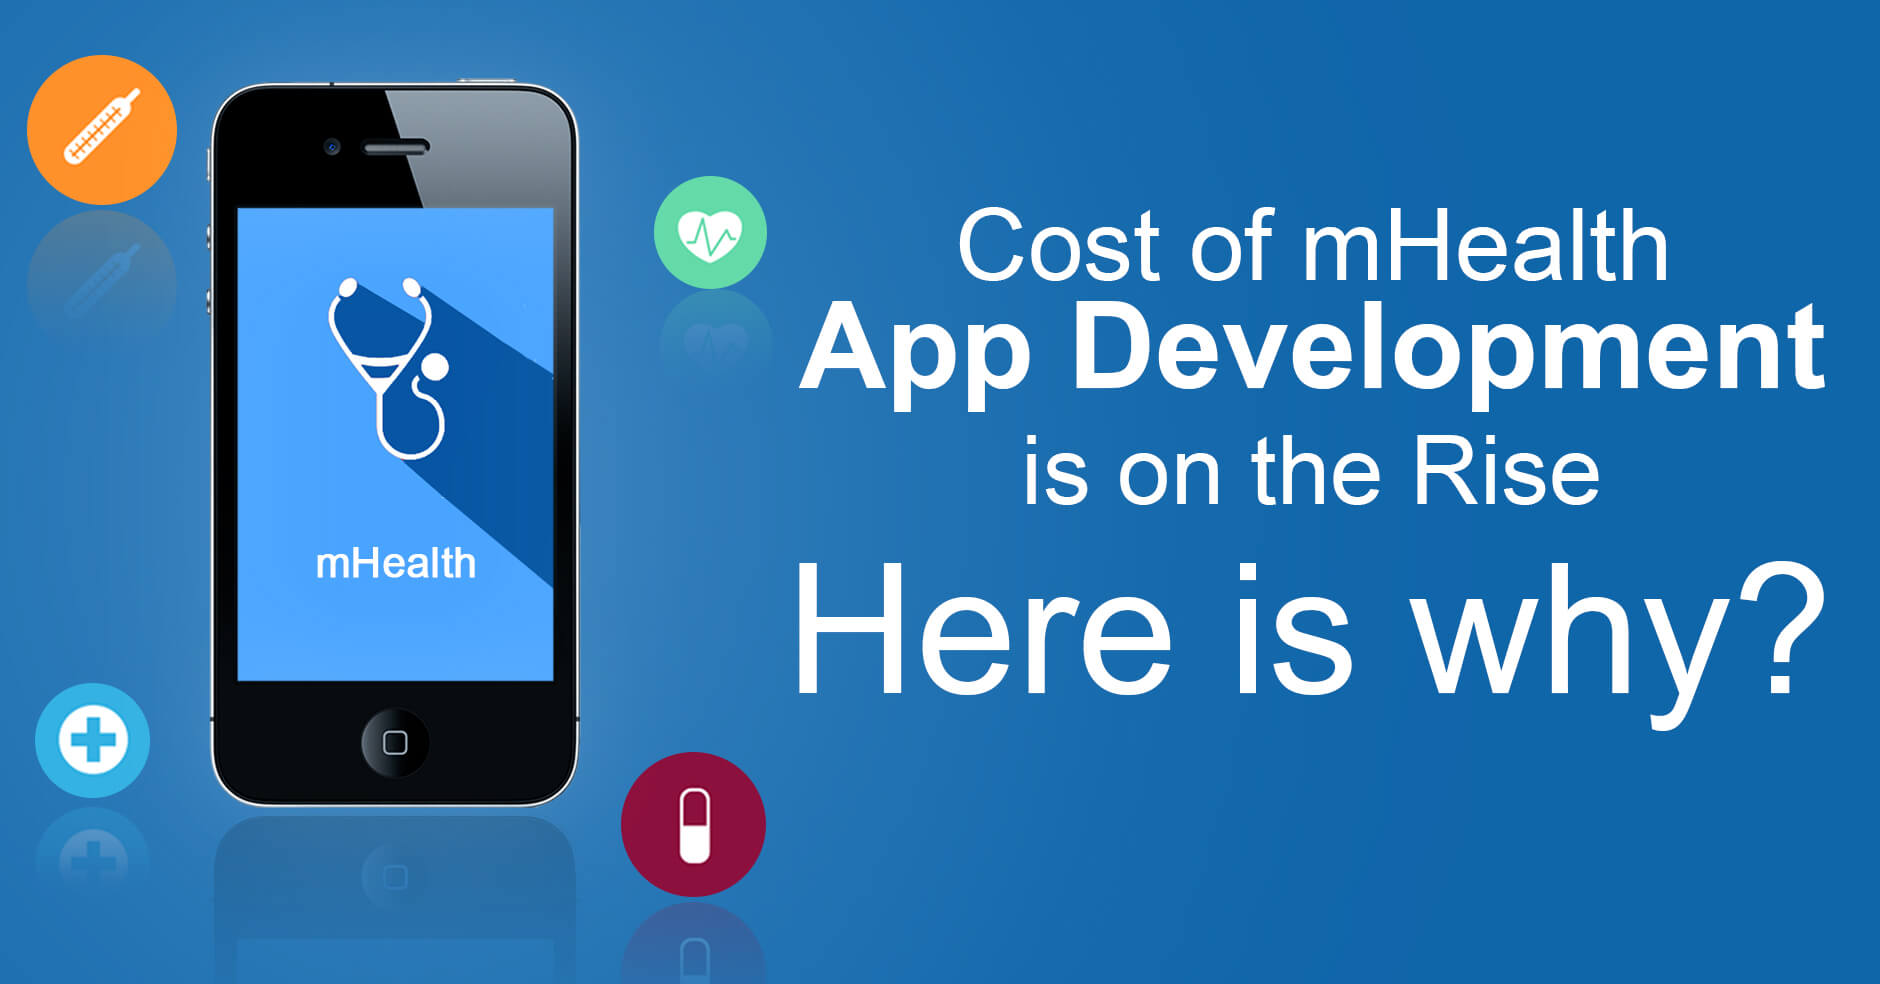 Cost of mHealth App Development is on the Rise Here is why